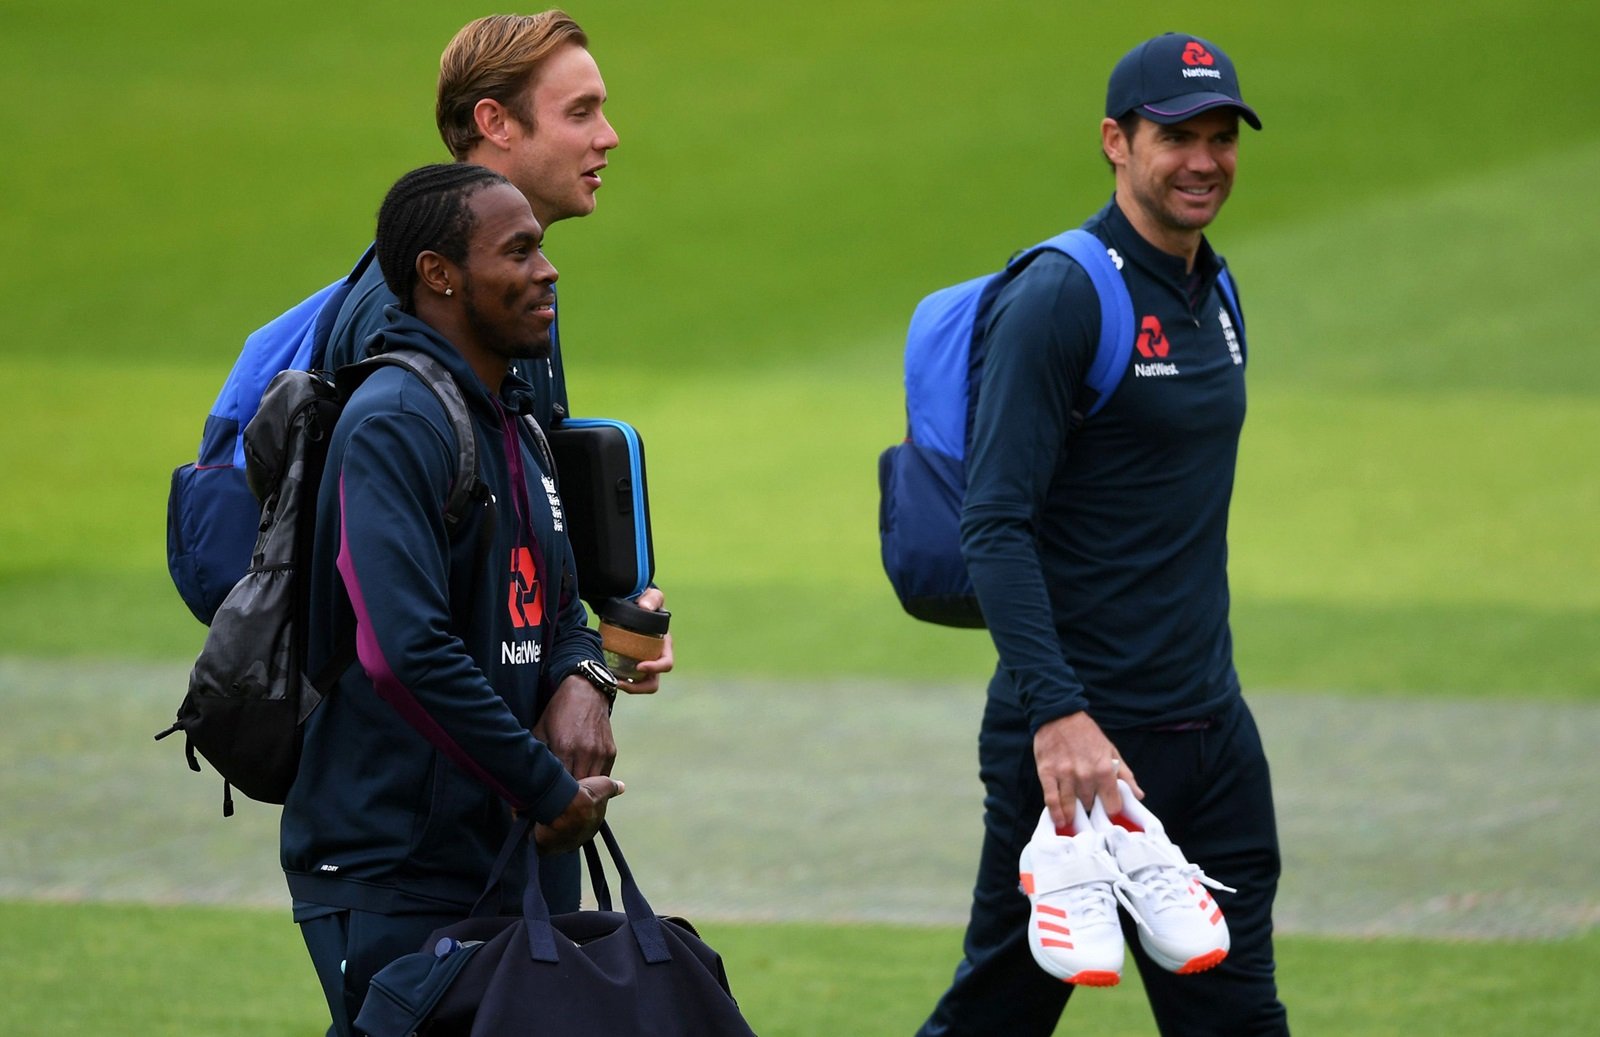 James Anderson, Stuart Broad and Jofra Archer (Getty)